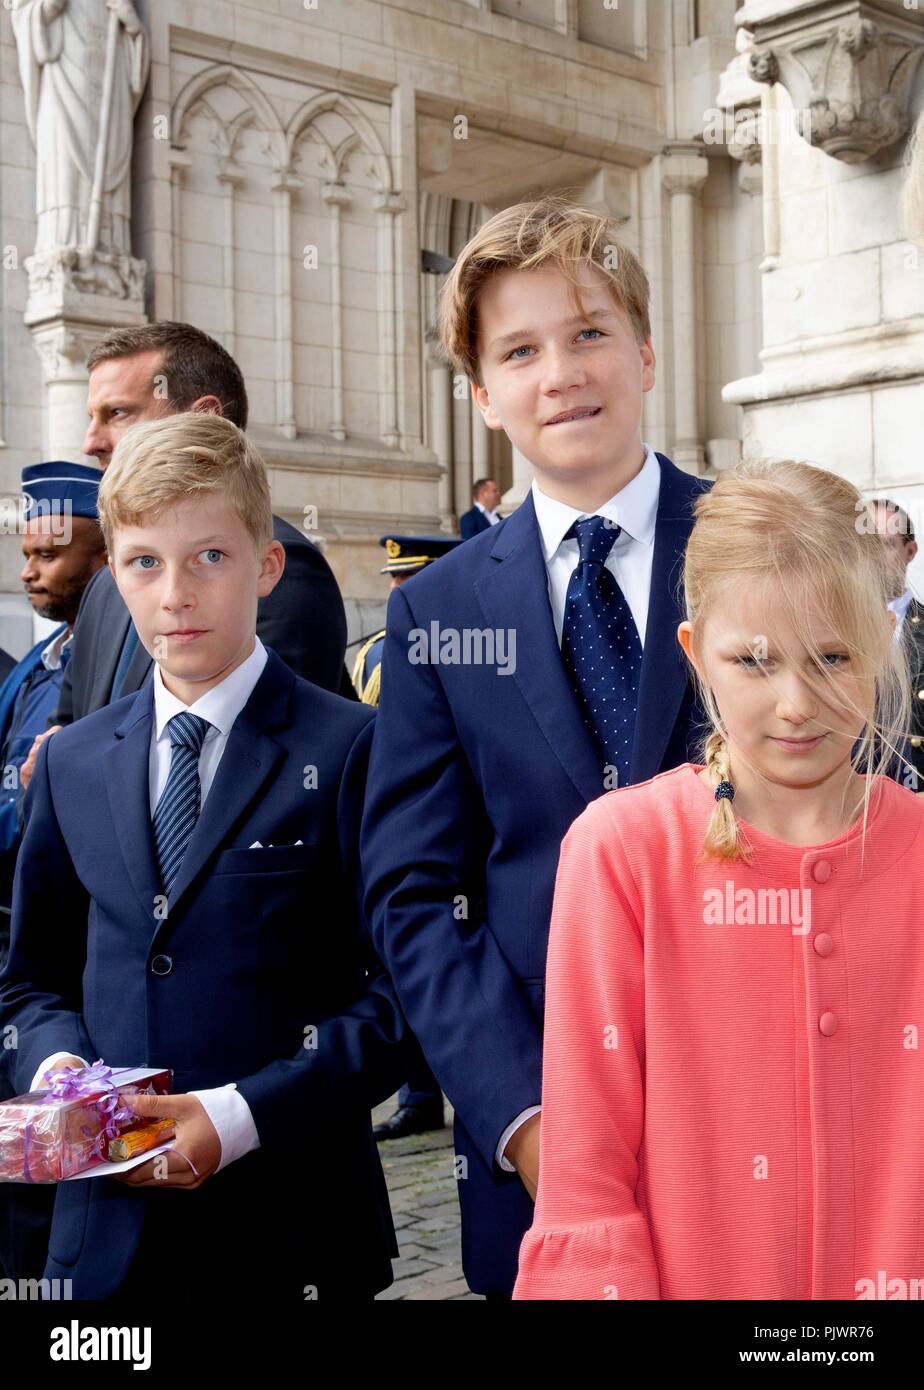 brussel-belgium-08th-sep-2018-prince-gabriel-prince-emmanuel-and-princess-eleonore-of-belgium-leave-at-the-onze-lieve-vrouwekerk-in-laken-on-september-8-2018-after-attending-the-eucharistic-celebration-at-the-occasion-of-the-25th-anniversary-of-the-death-of-hm-king-boudewijn-photo-albert-nieboer-netherlands-outpoint-de-vue-out-credit-dpaalamy-live-news-PJWR76.jpg